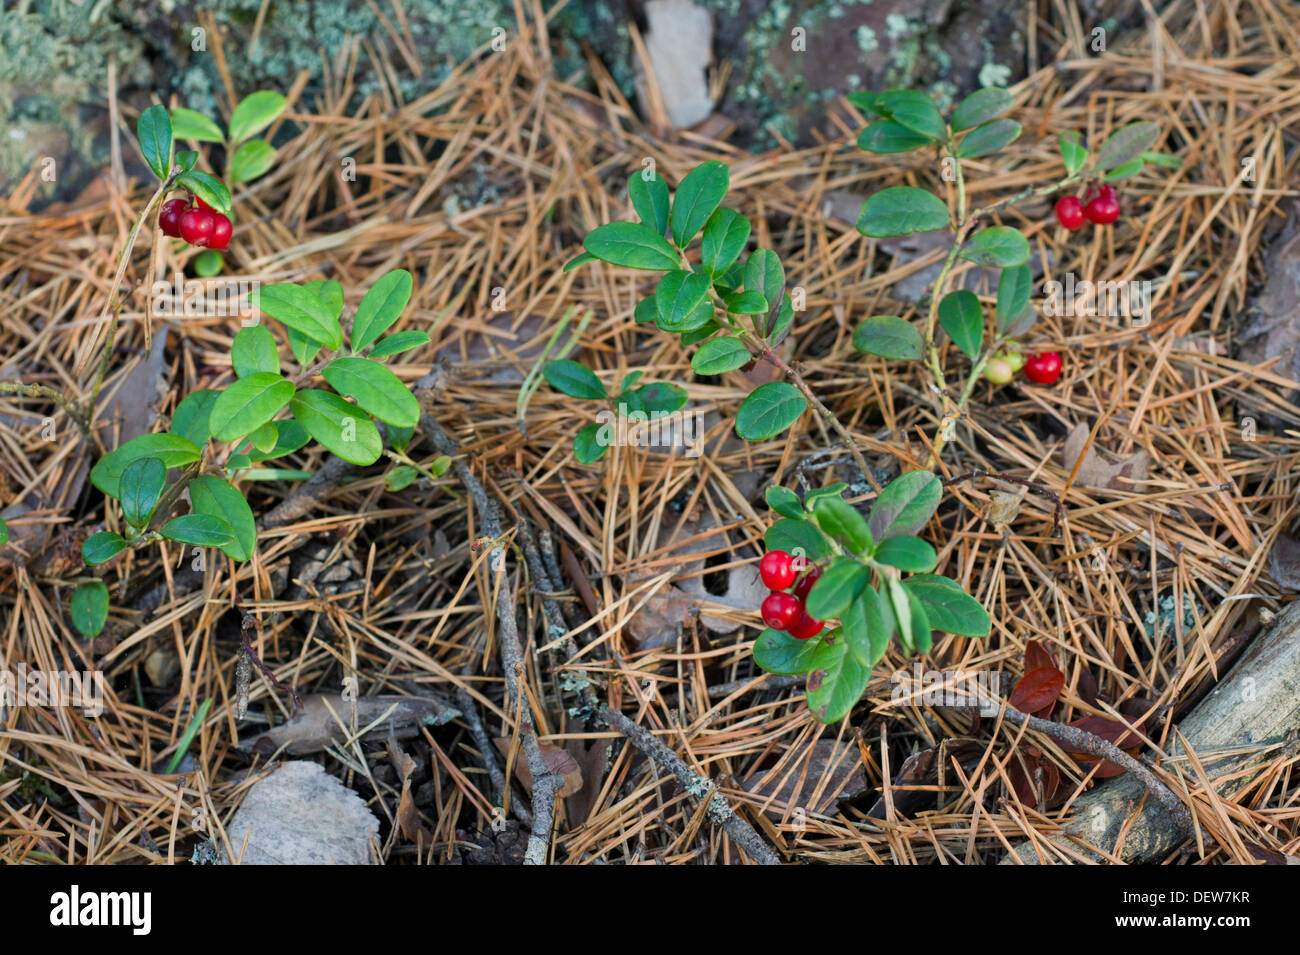 Lingon berries with pine needles top view Stock Photo